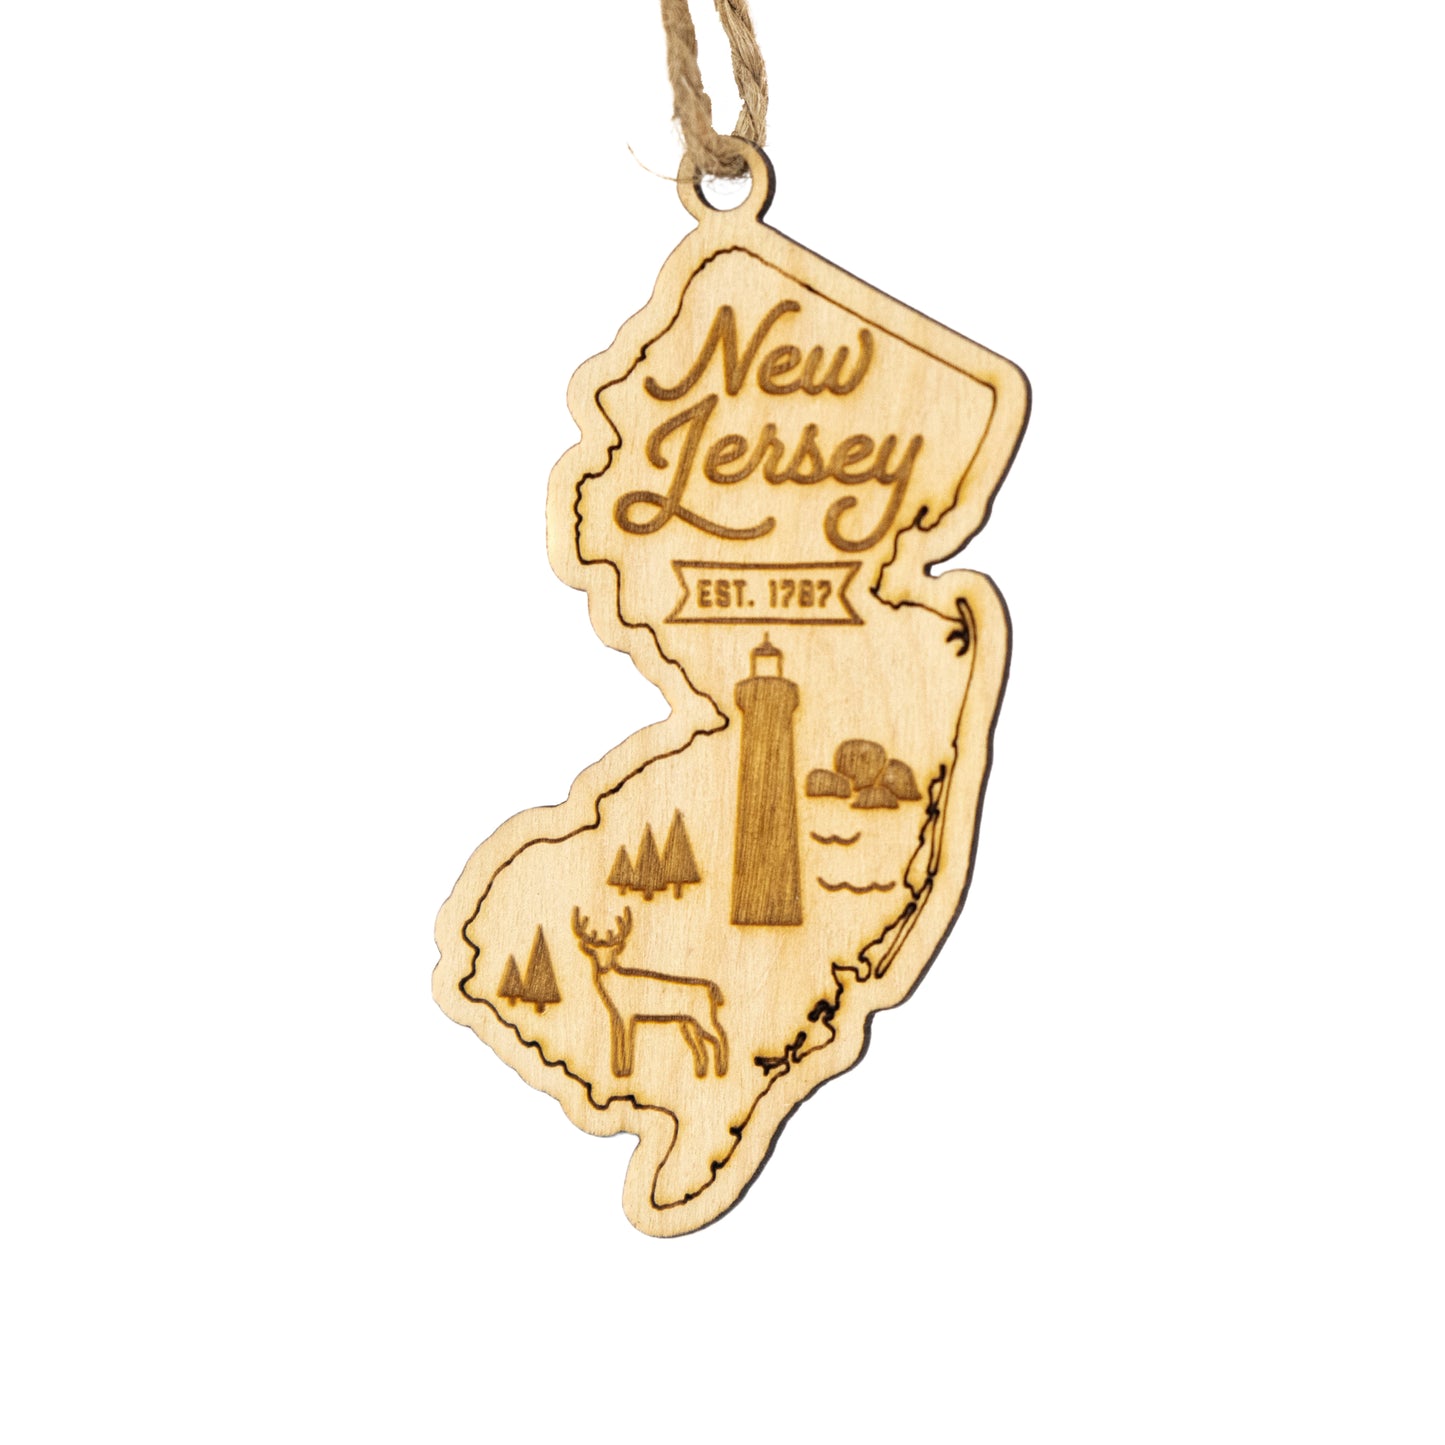 New Jersey Home Town Ornament